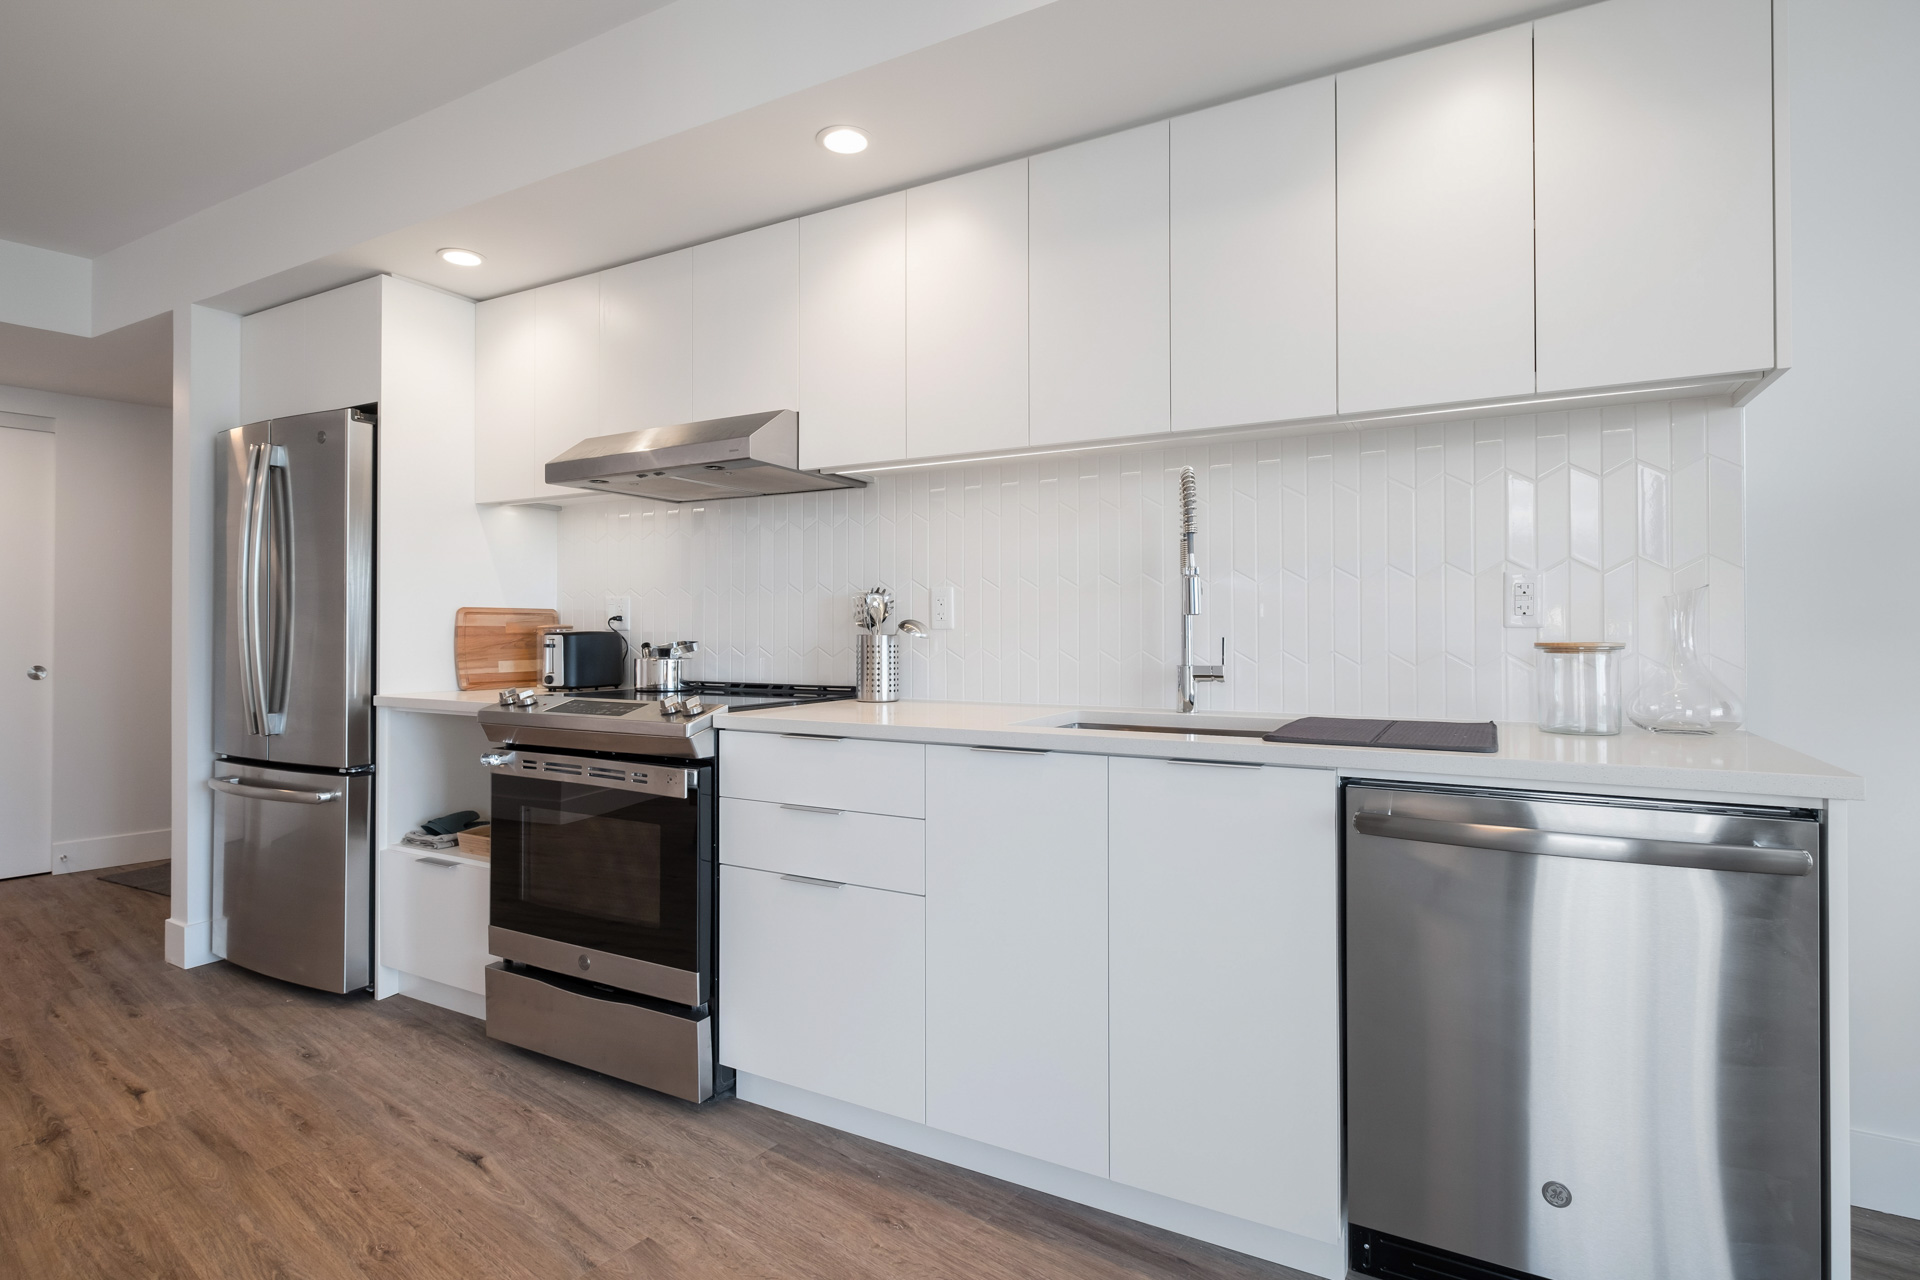 Unit #1306 in The Lonsdale Rental Apartments